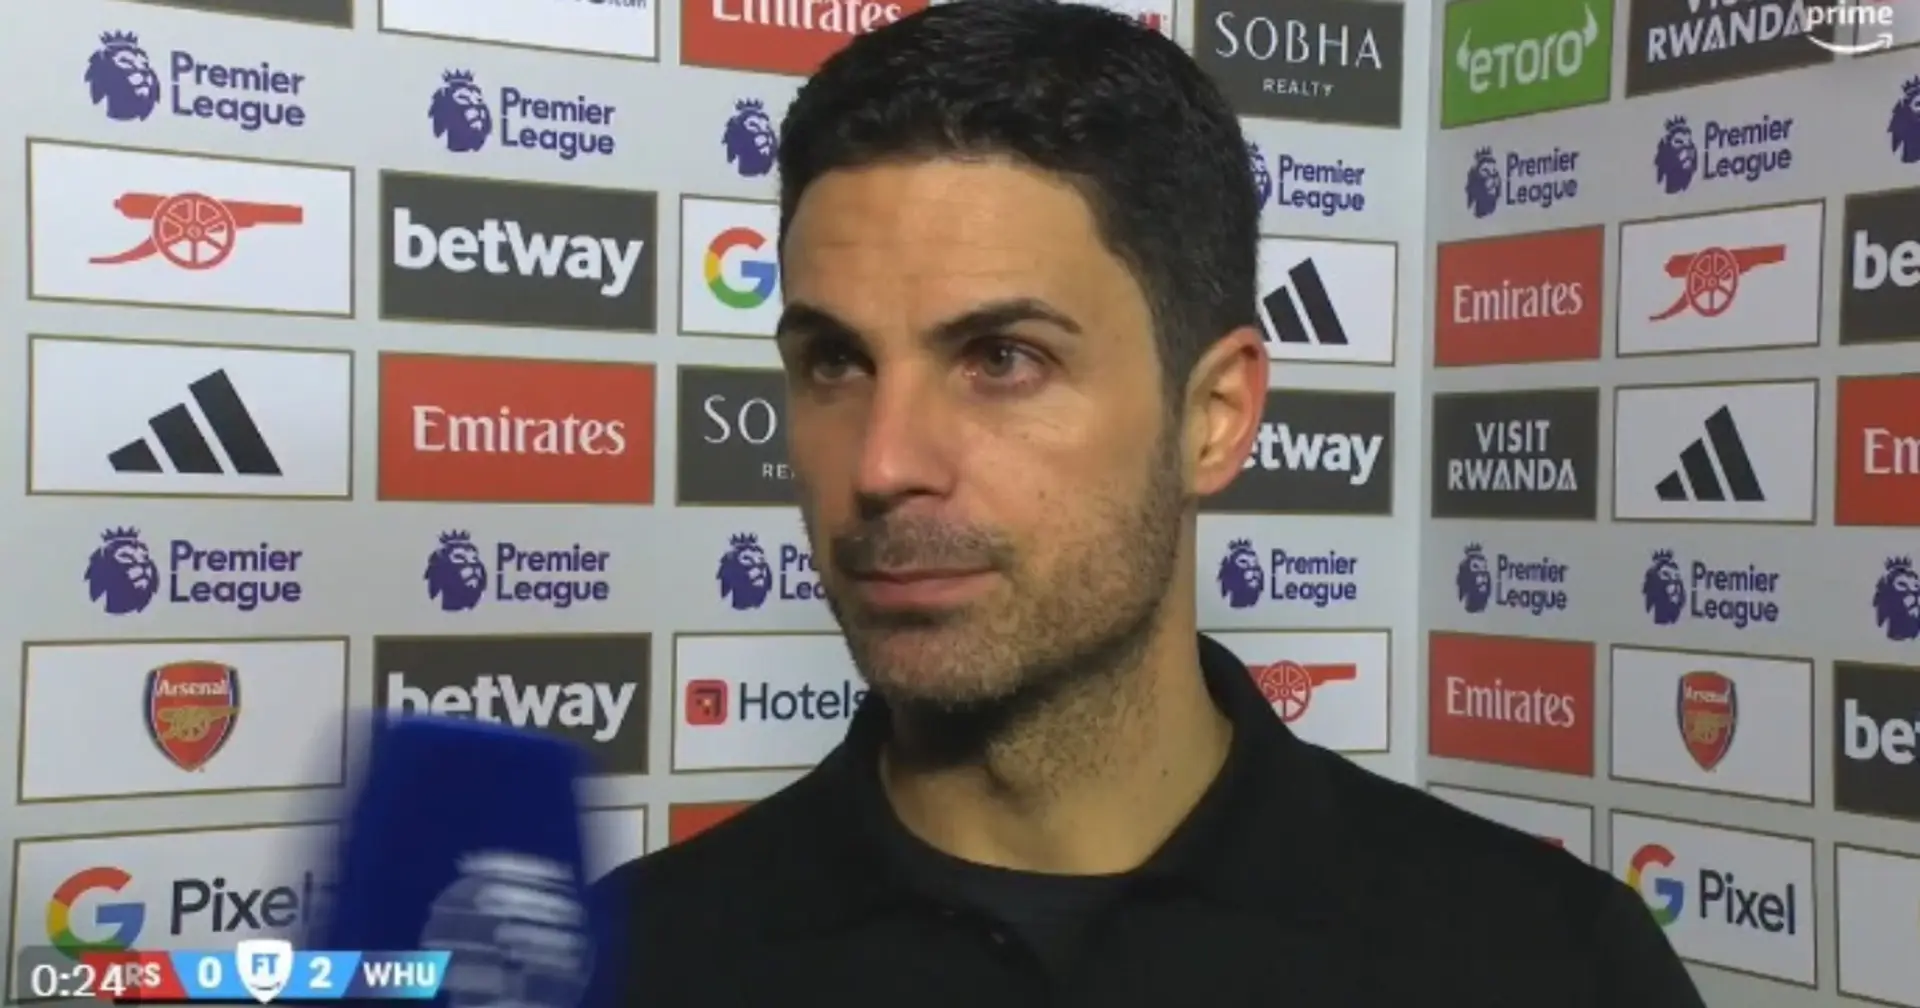 'We couldn't get what we deserved': Mikel Arteta frustrated by West Ham result